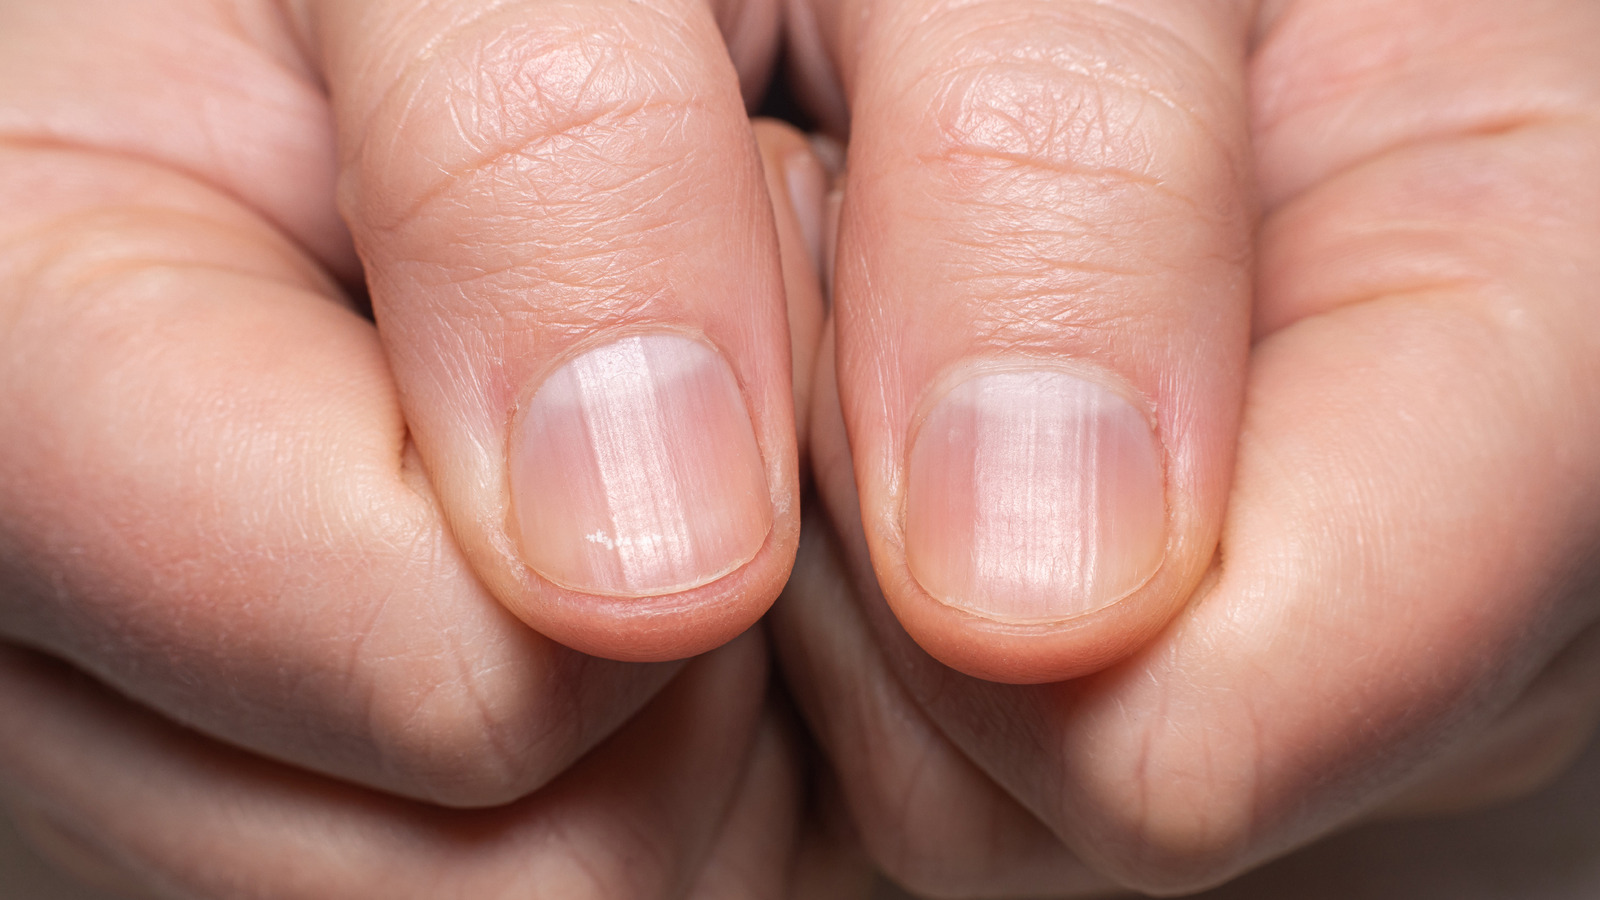 How to Make Your Nails Grow Faster, According to Experts